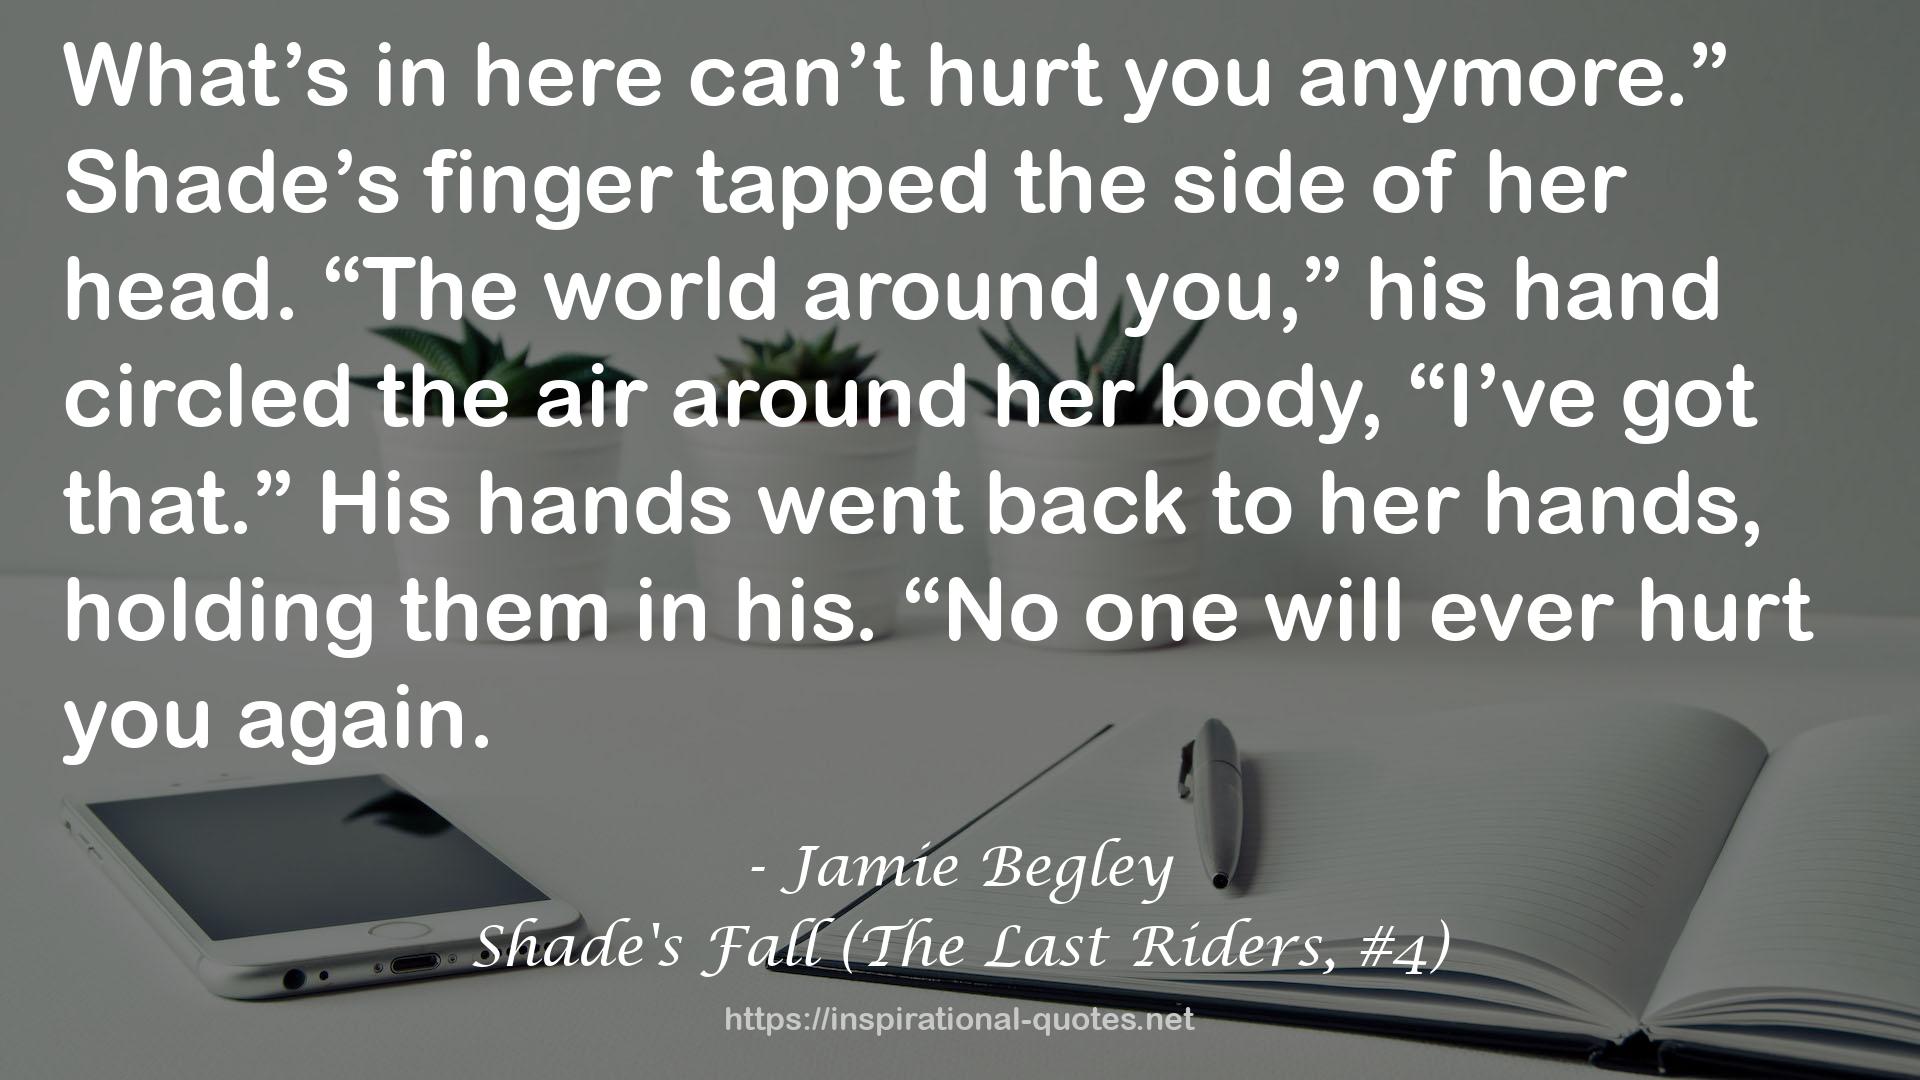 Shade's Fall (The Last Riders, #4) QUOTES